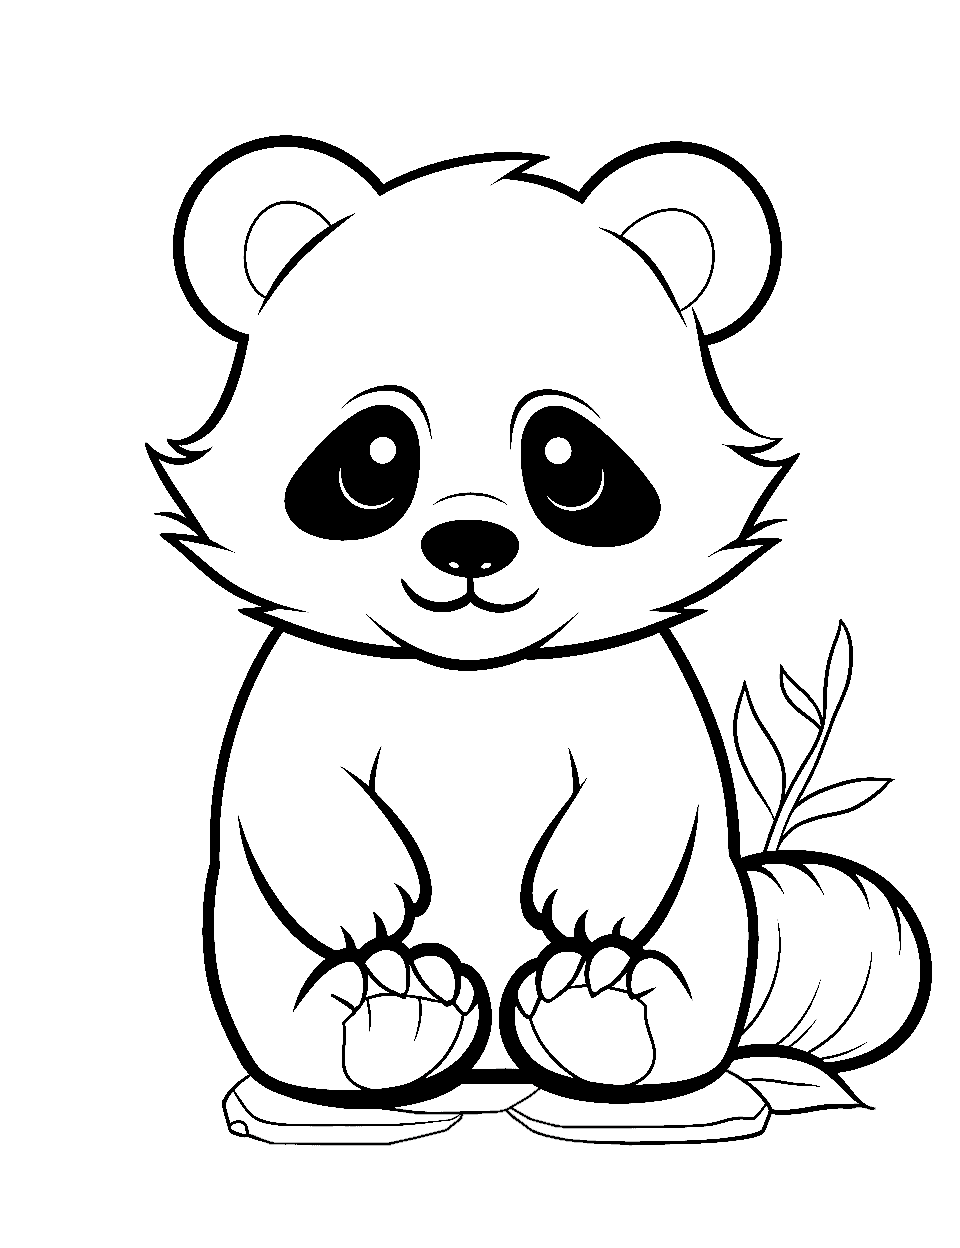 Adorable Red Panda Coloring Page - A cheerful red panda, sitting and wrapping its tail around itself.